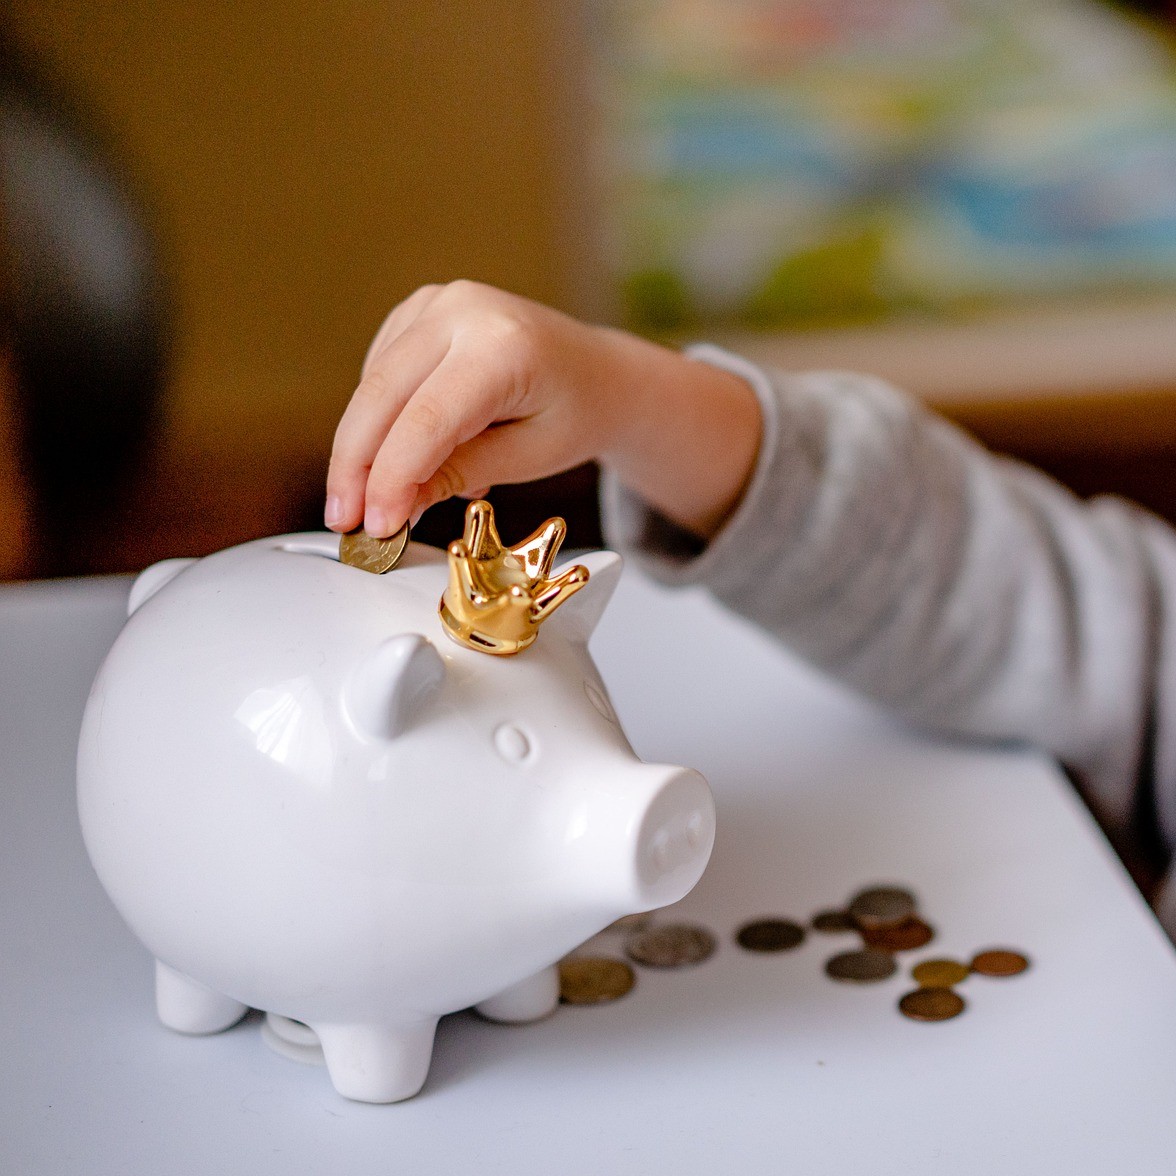 A child reaching to put coins into a piggy bank